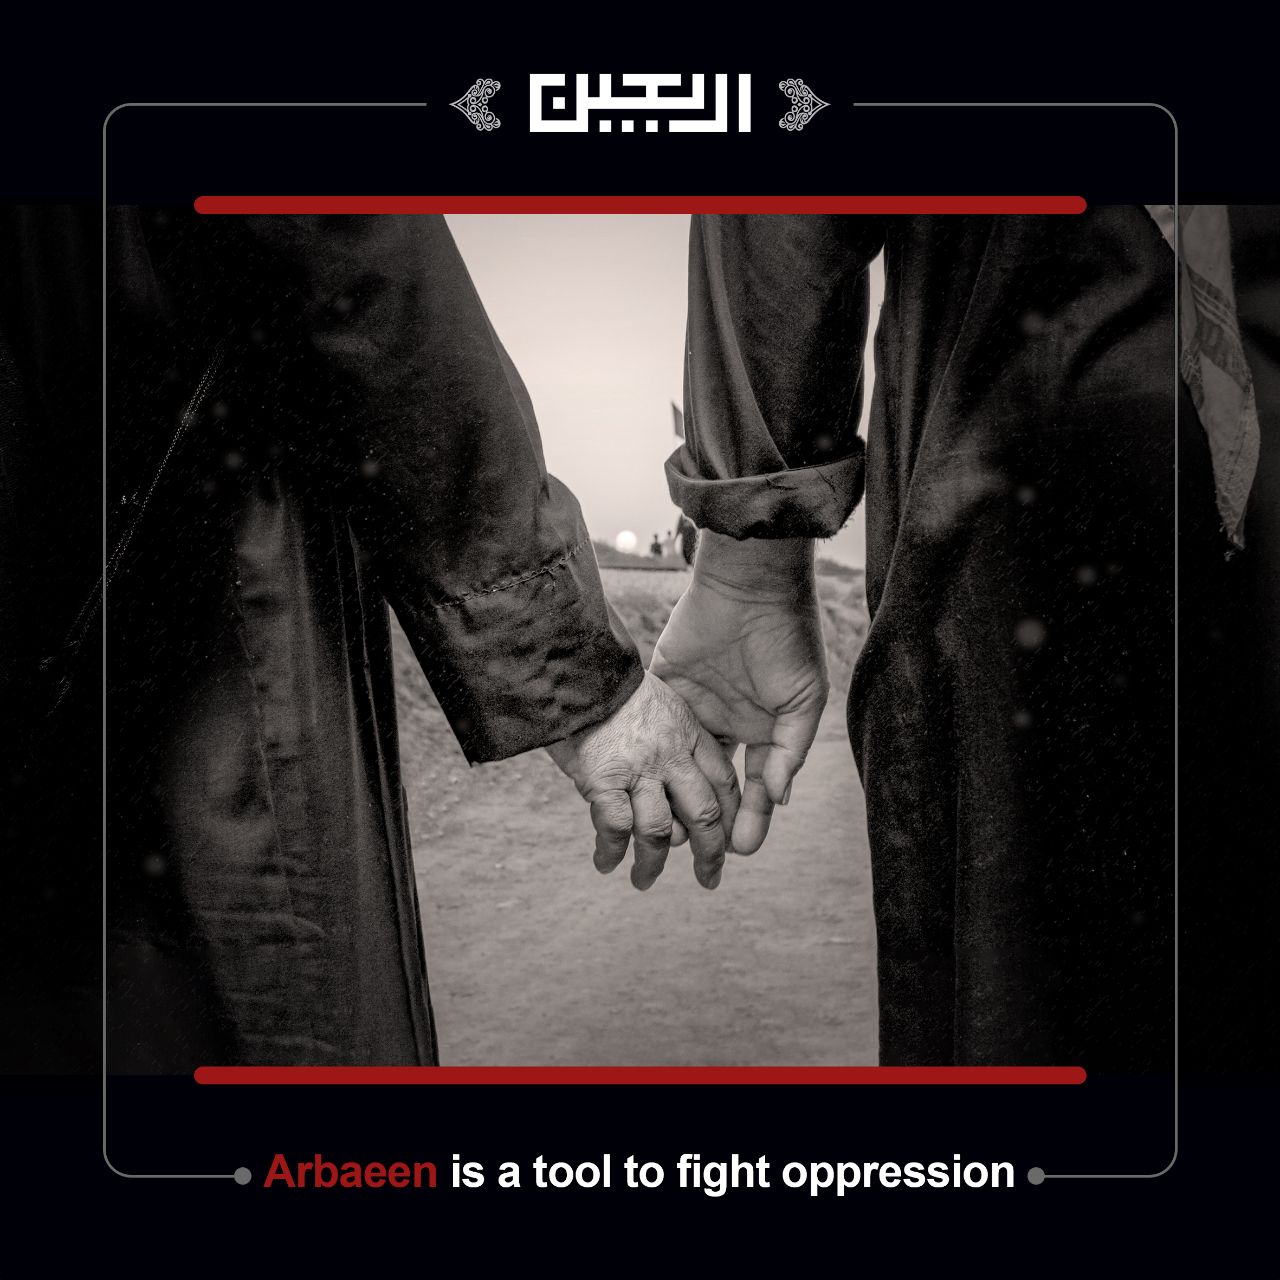 Arbaeen is a tool to fight oppression